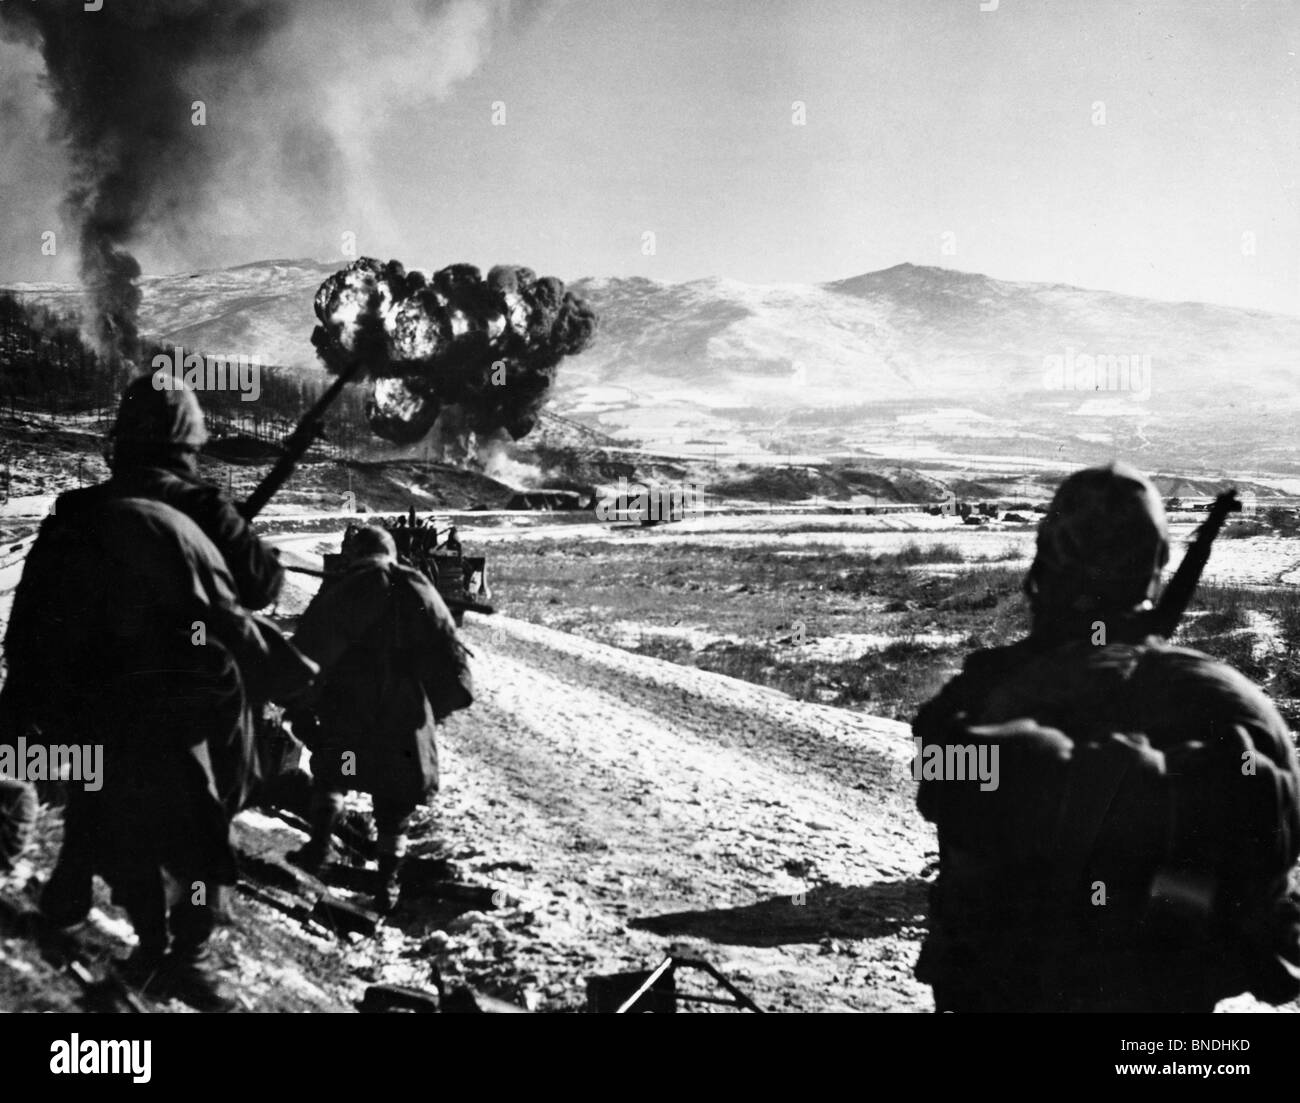 Army soldiers on a battlefield during war, Korean War Stock Photo